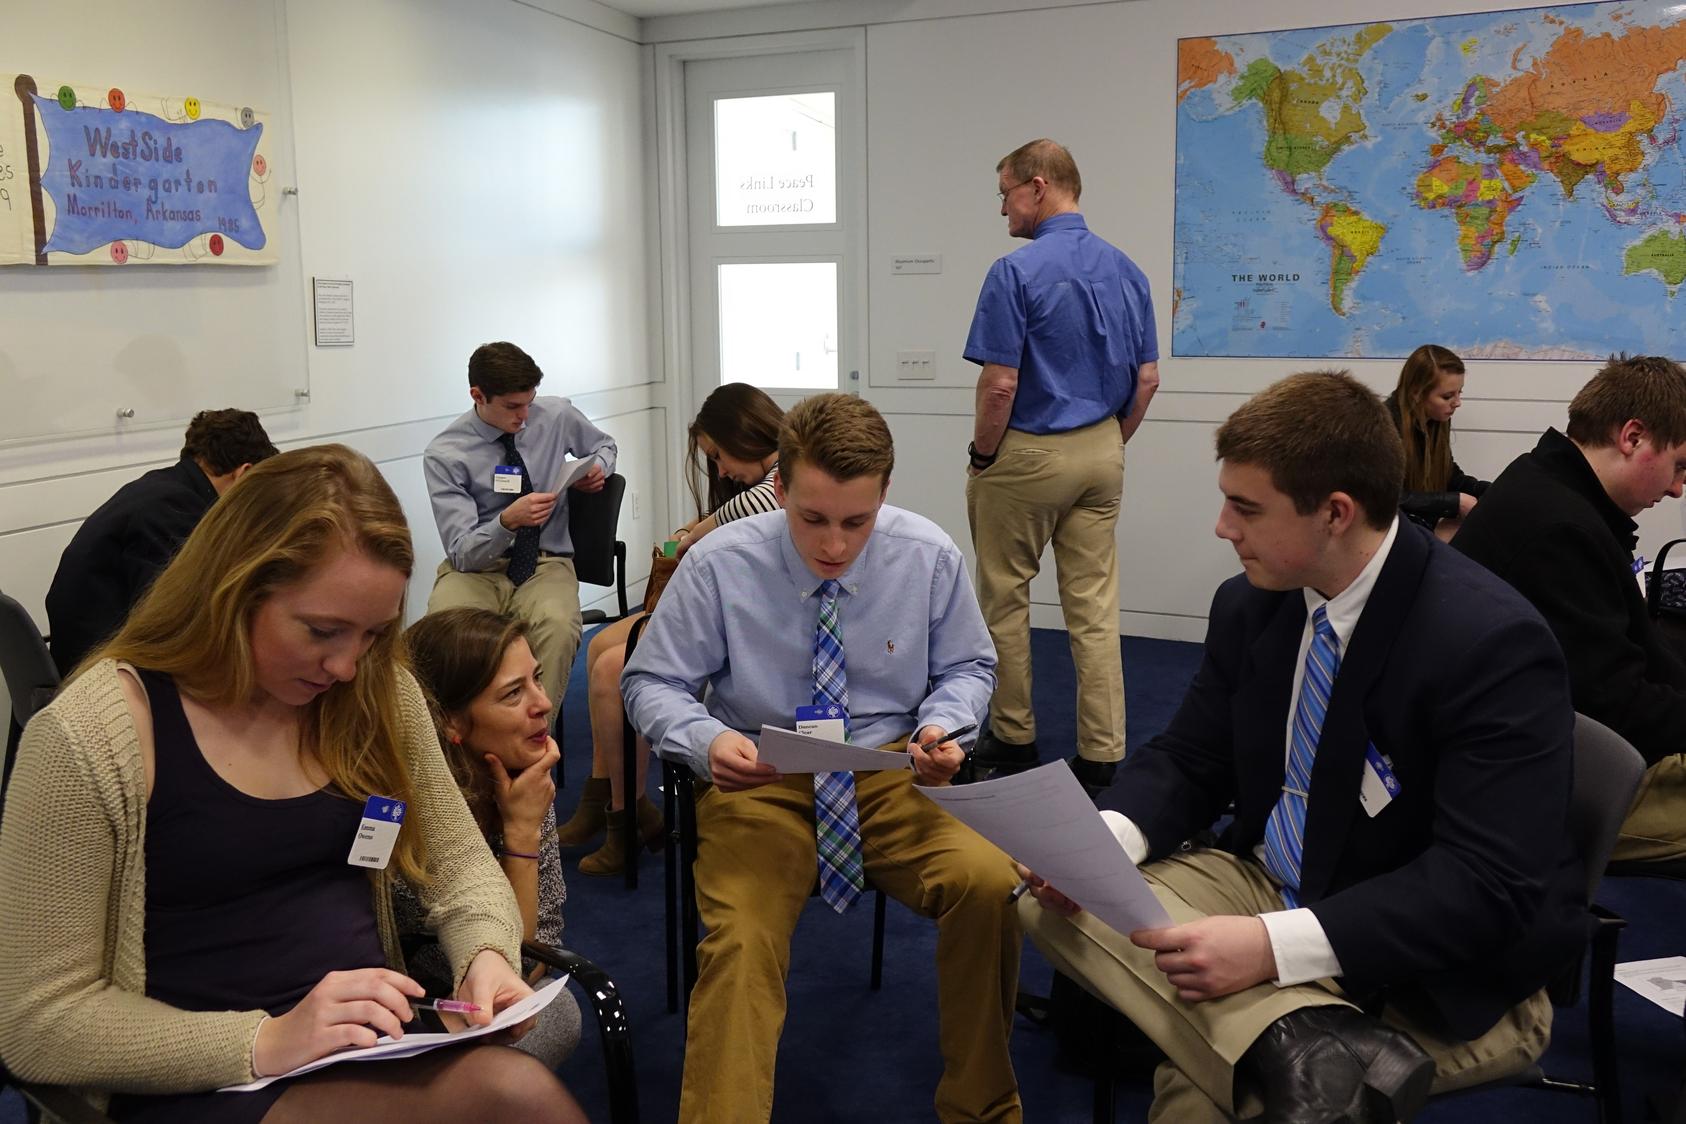 Amanda Terwillegar helps her students prepare for a simulation during a workshop at the U.S. Institute of Peace.